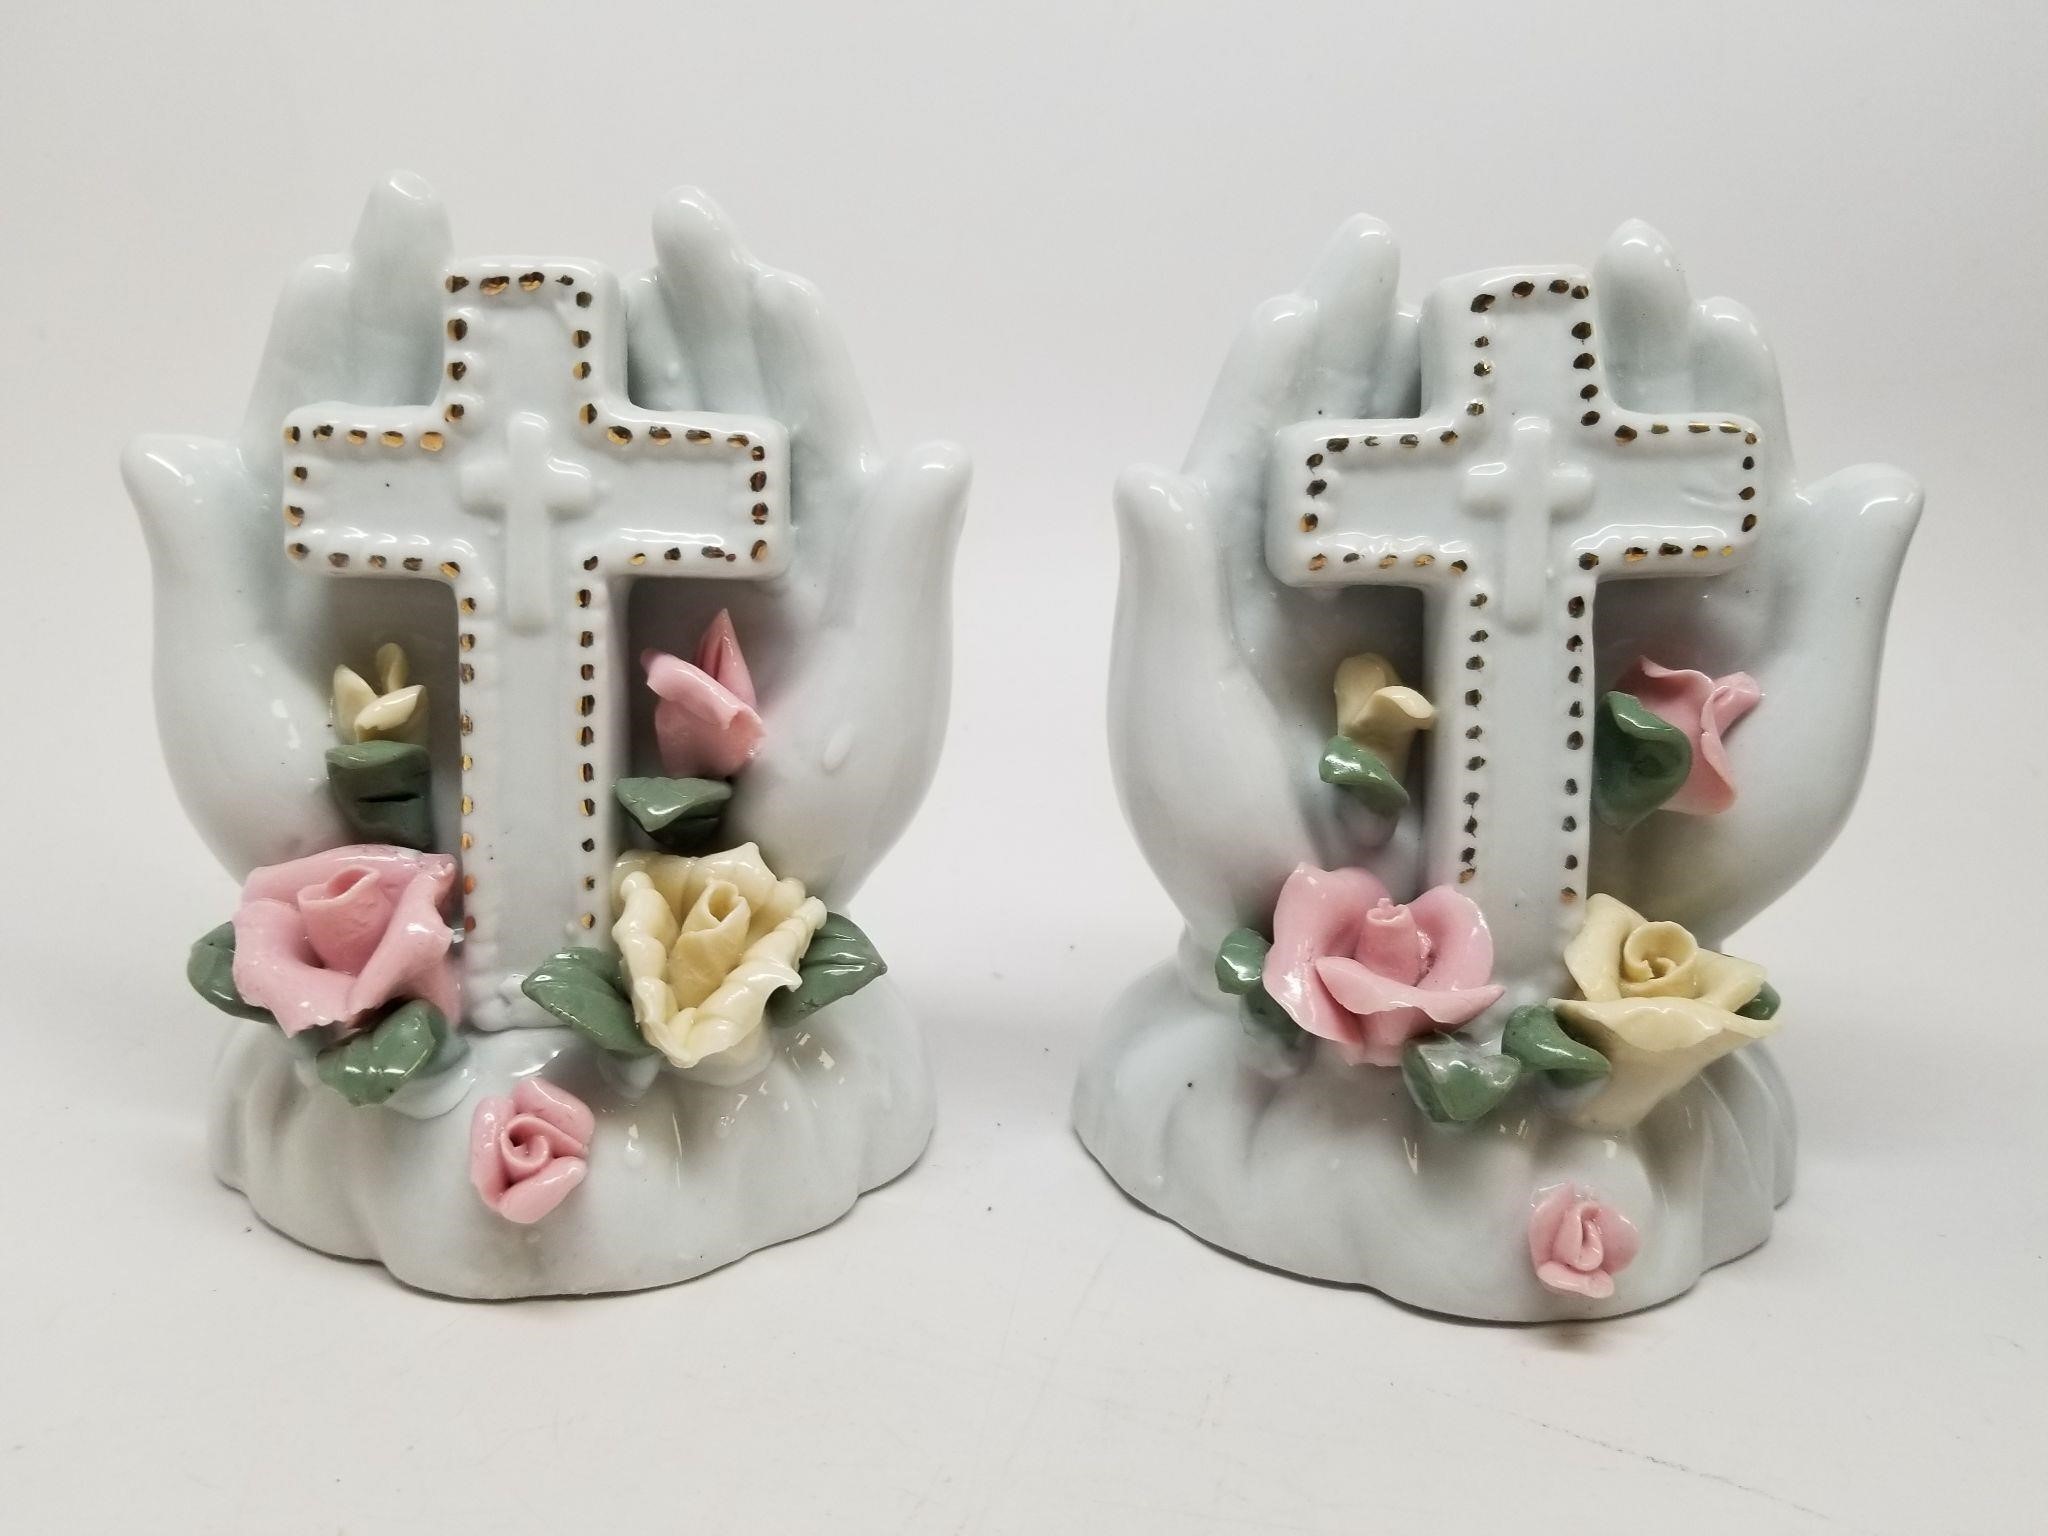 Porcelain Hand and Cross Figures